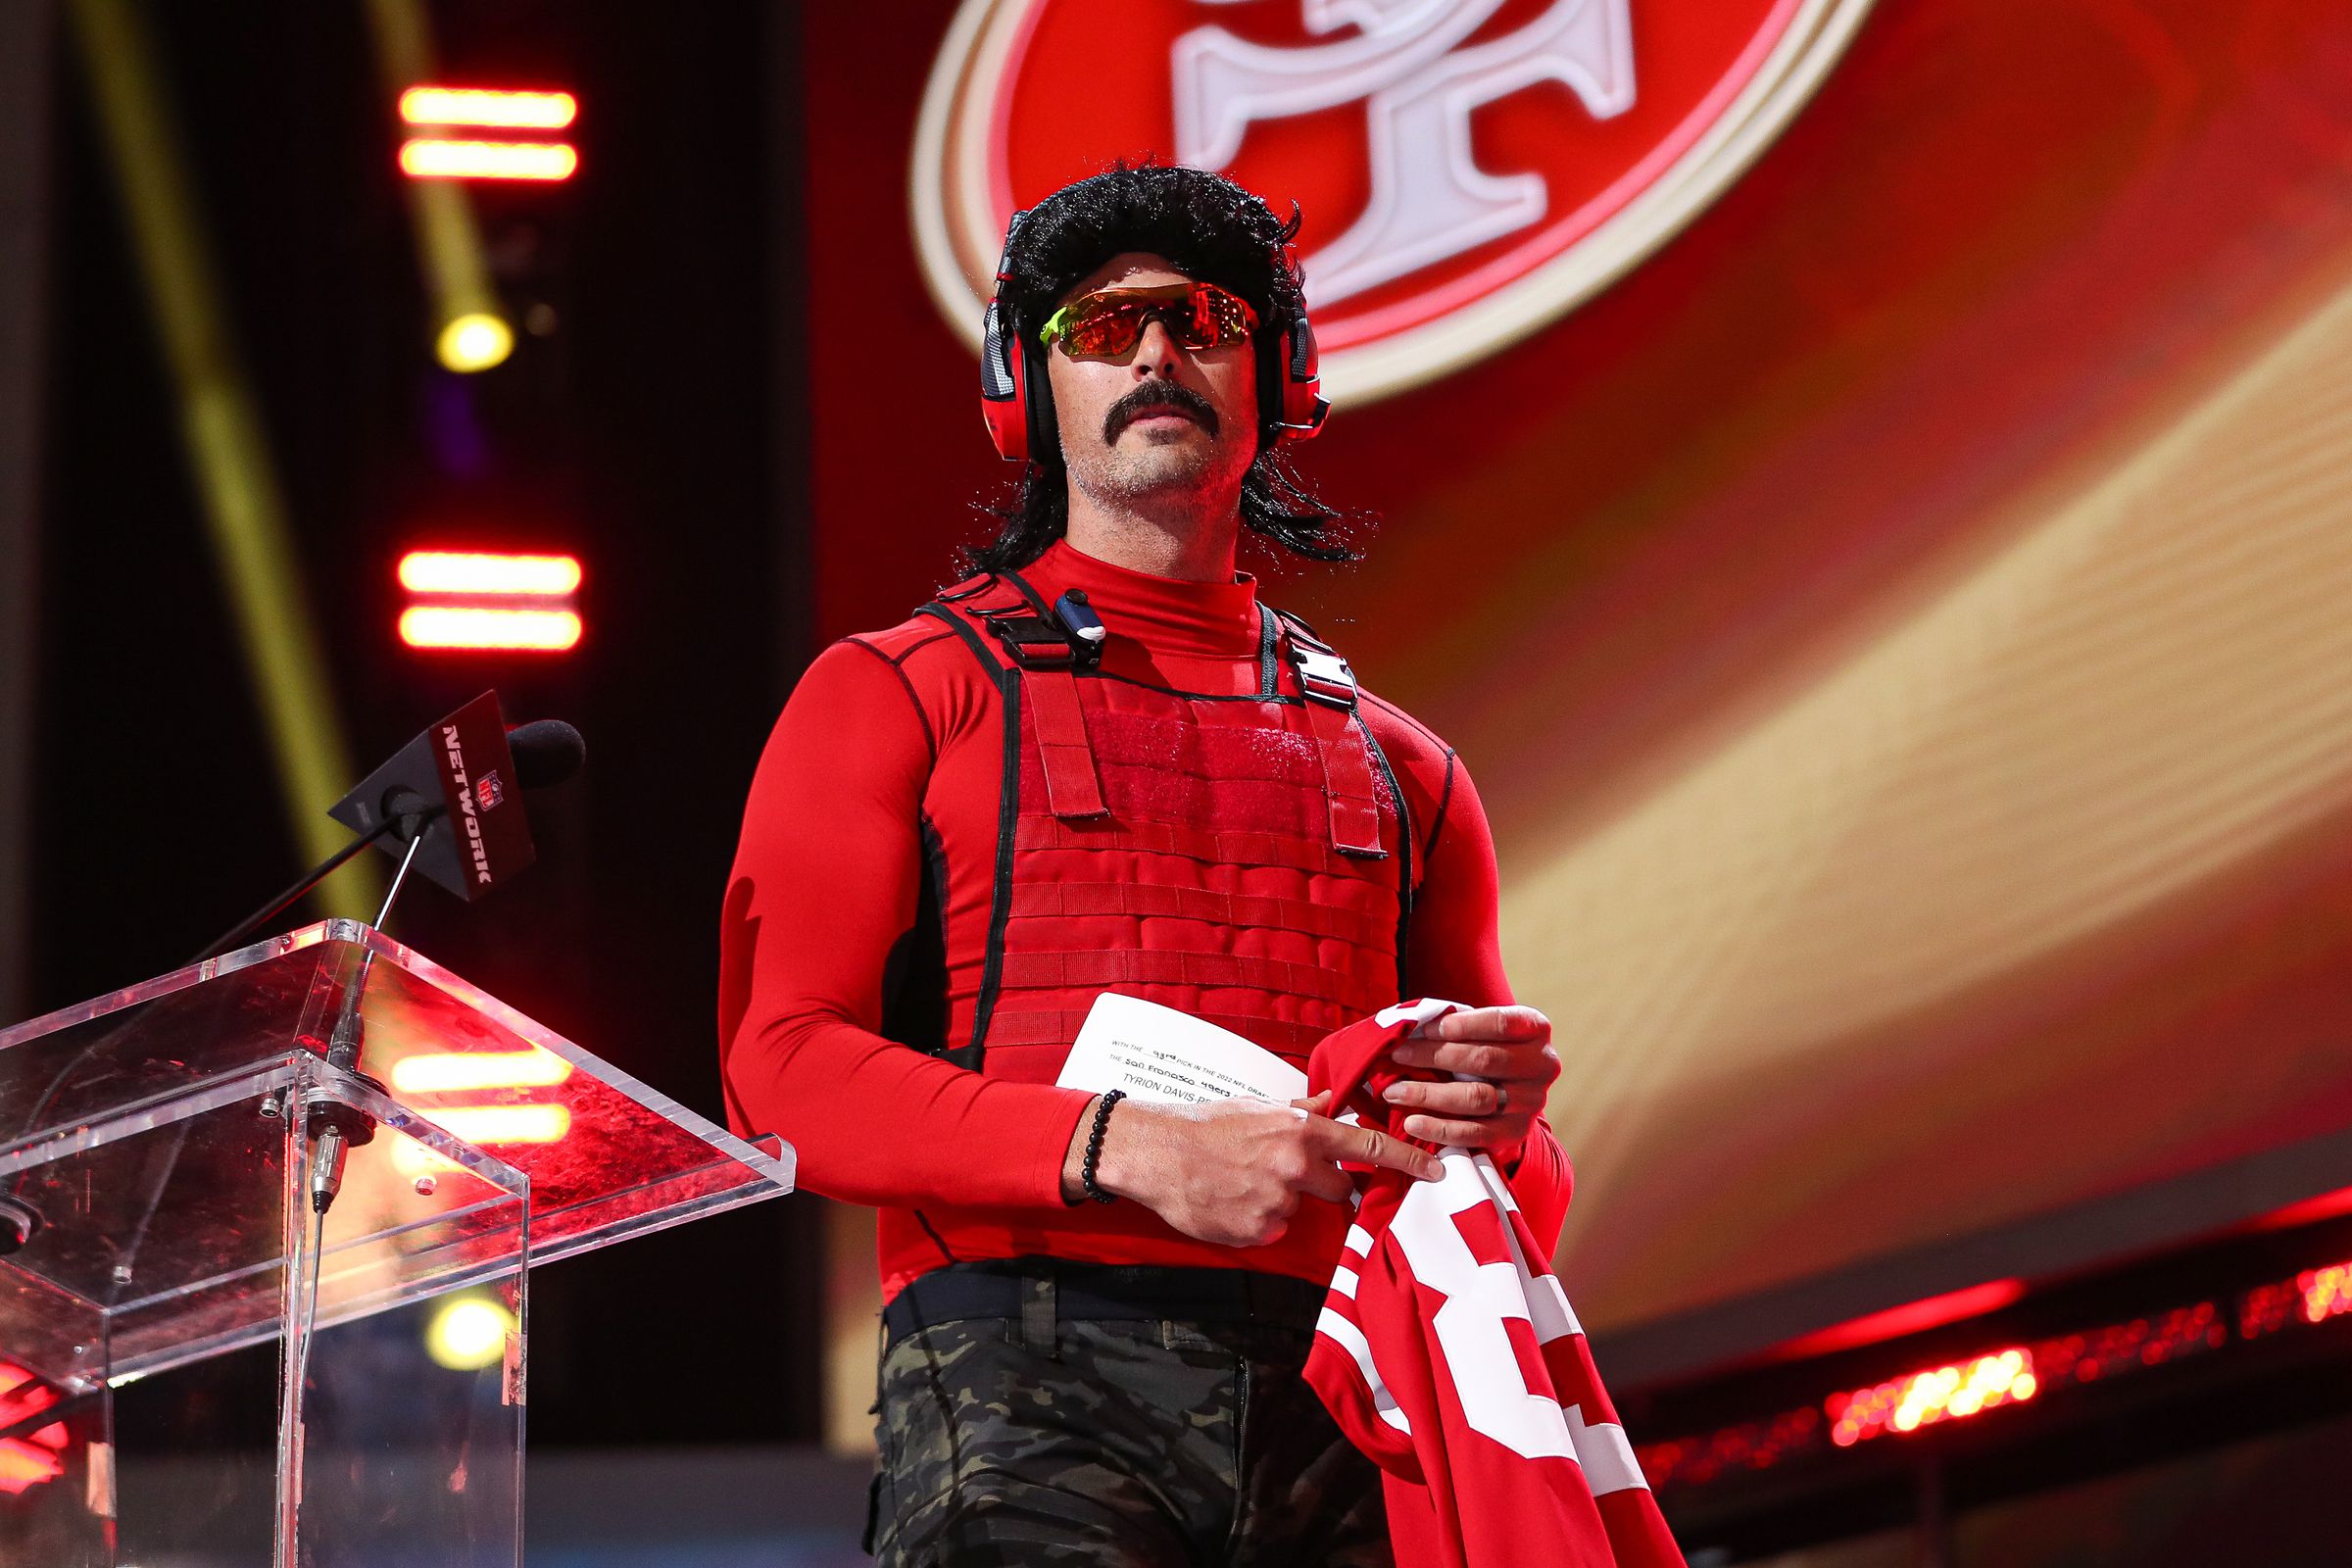 Video game streamer Dr. DisRespect presents on stage during round three of the 2022 NFL Draft on April 28th, 2022, in Las Vegas, Nevada.